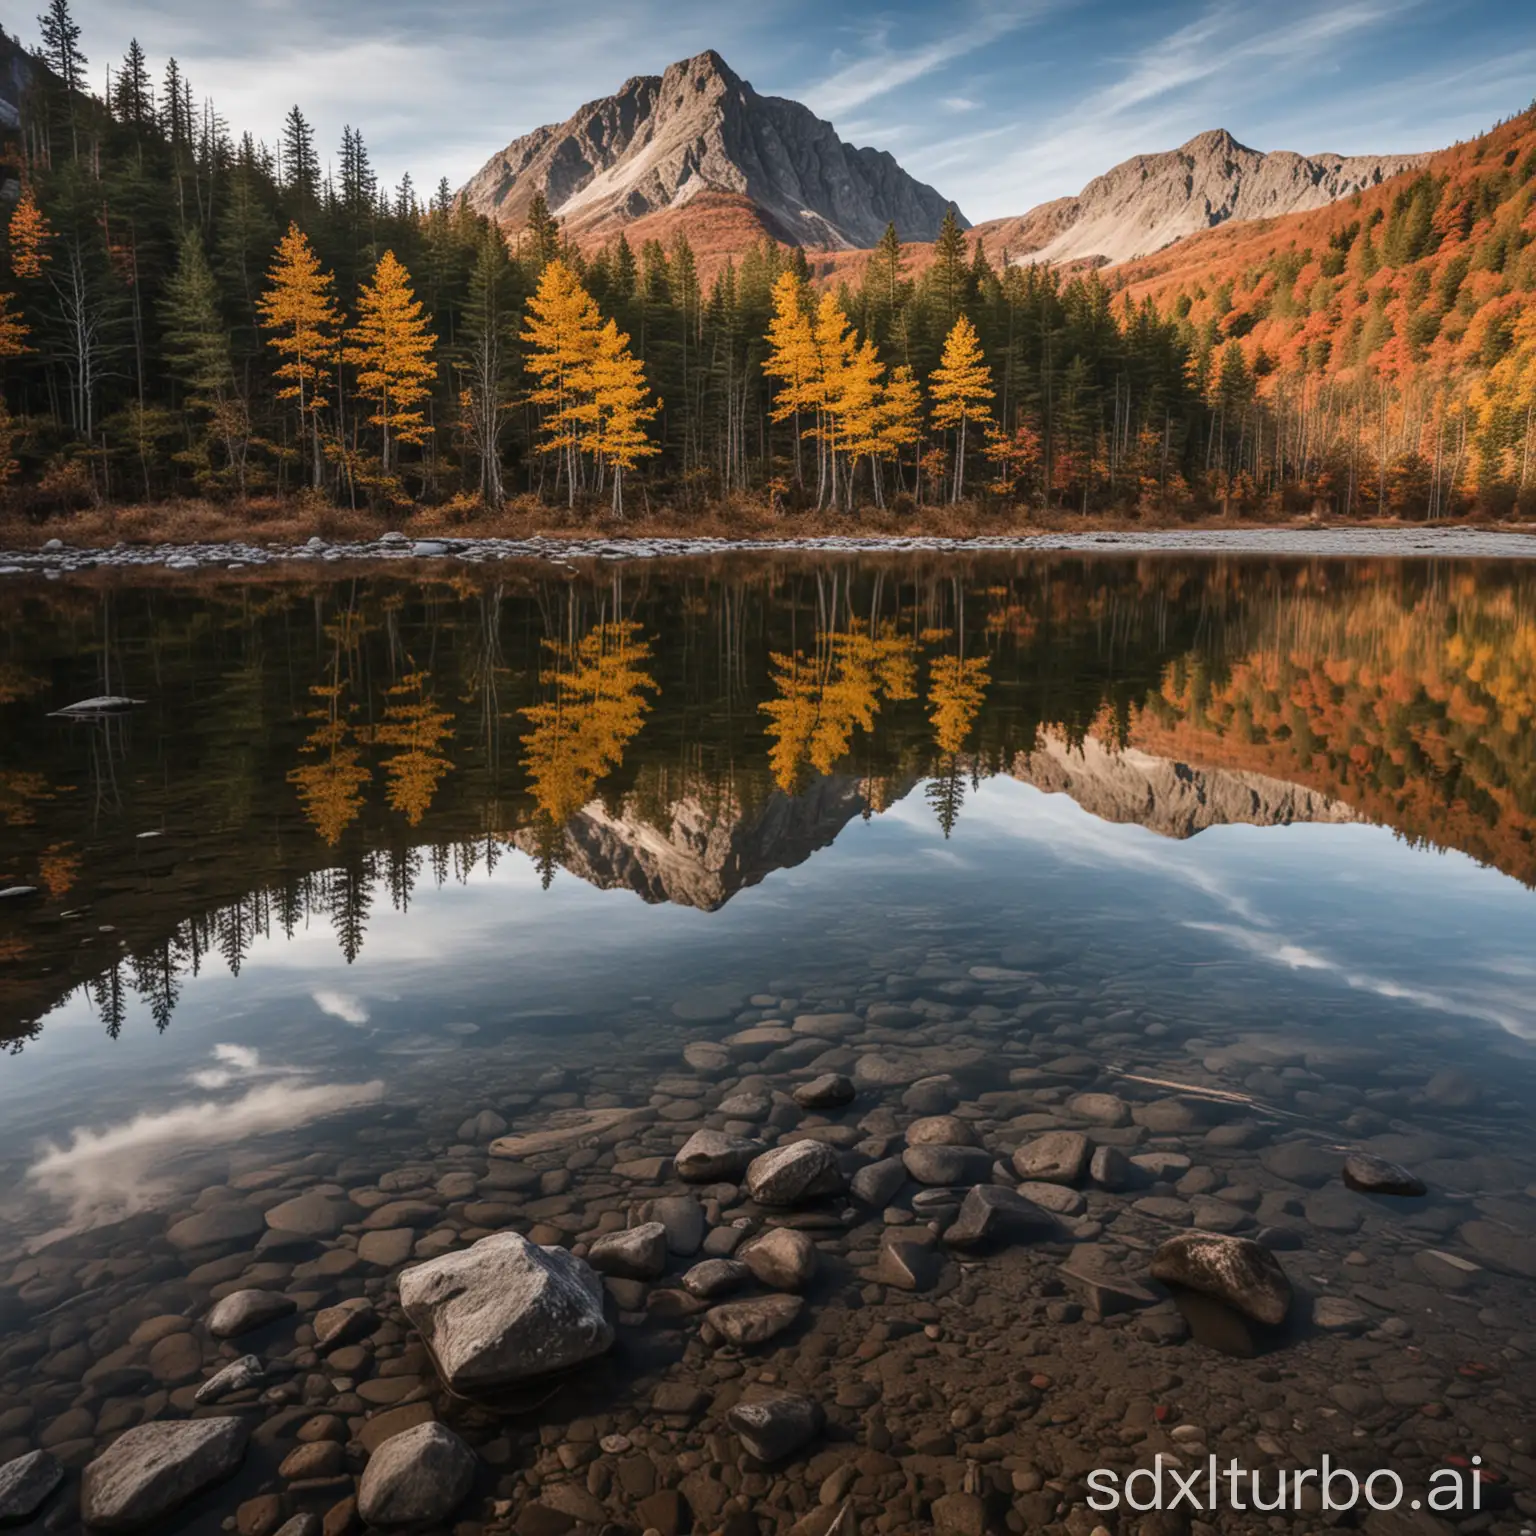 Autumn Lake with Mountain Reflection, Use a wide-angle lens with a focal length of 50mm and set the aperture to f/6.4. Use a tripod to keep the camera steady,